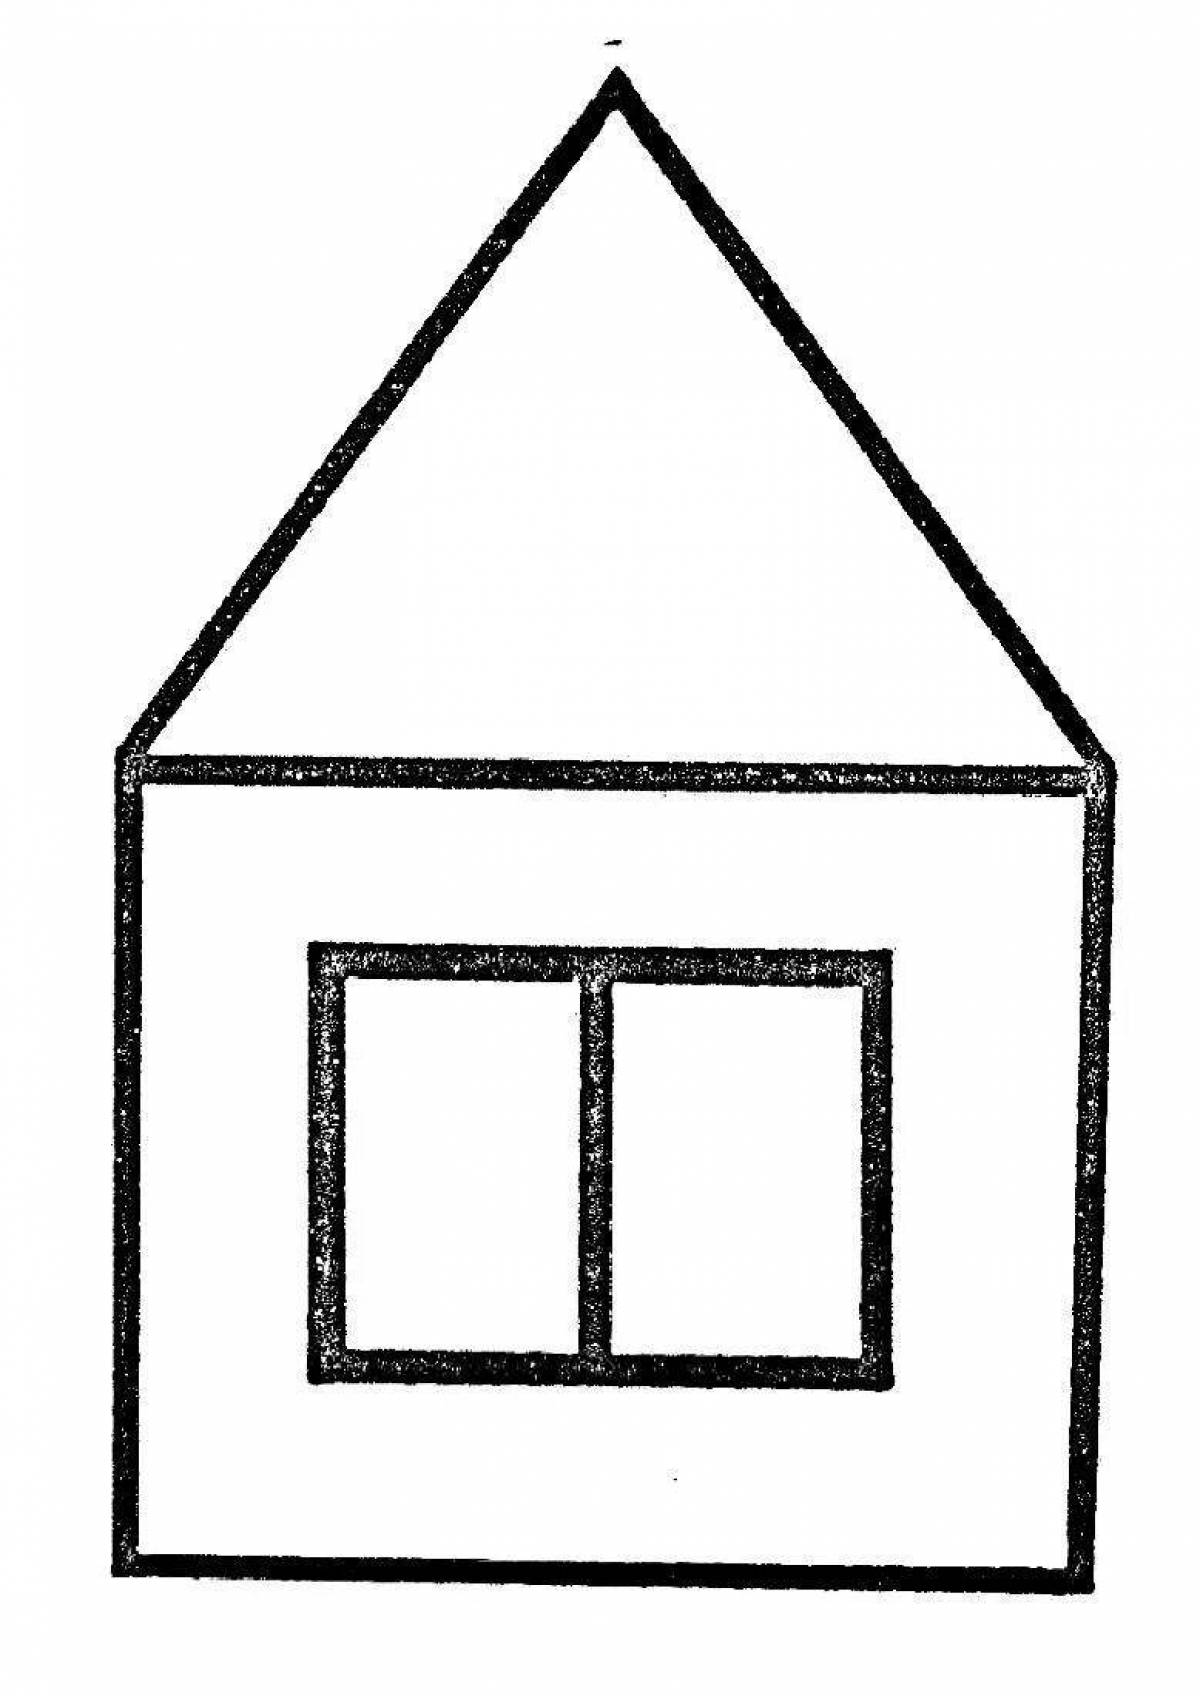 Invitation to color a simple house for children